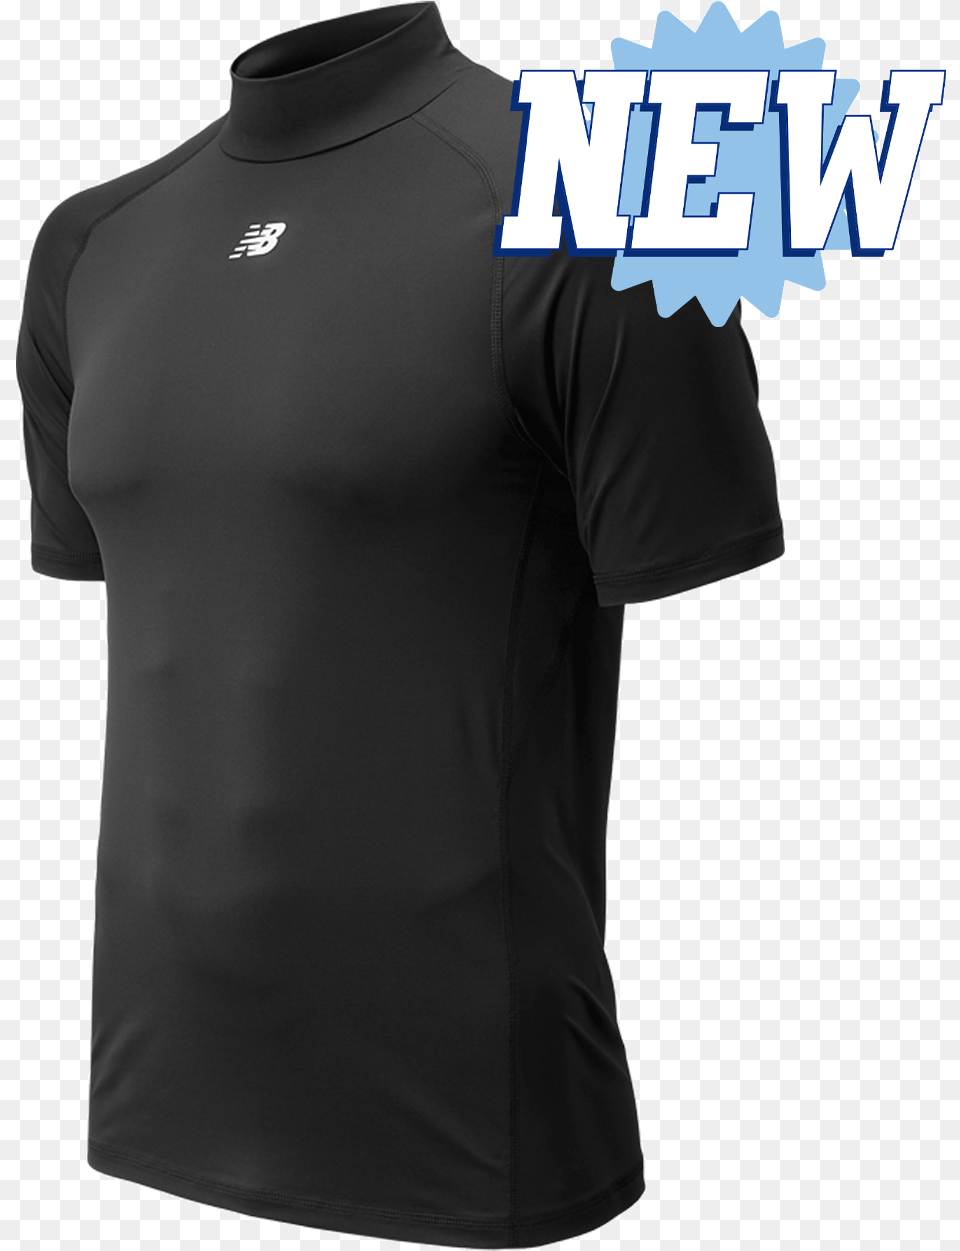 New Balance Challenger Mock Neck Active Shirt, Clothing, T-shirt, Adult, Male Png